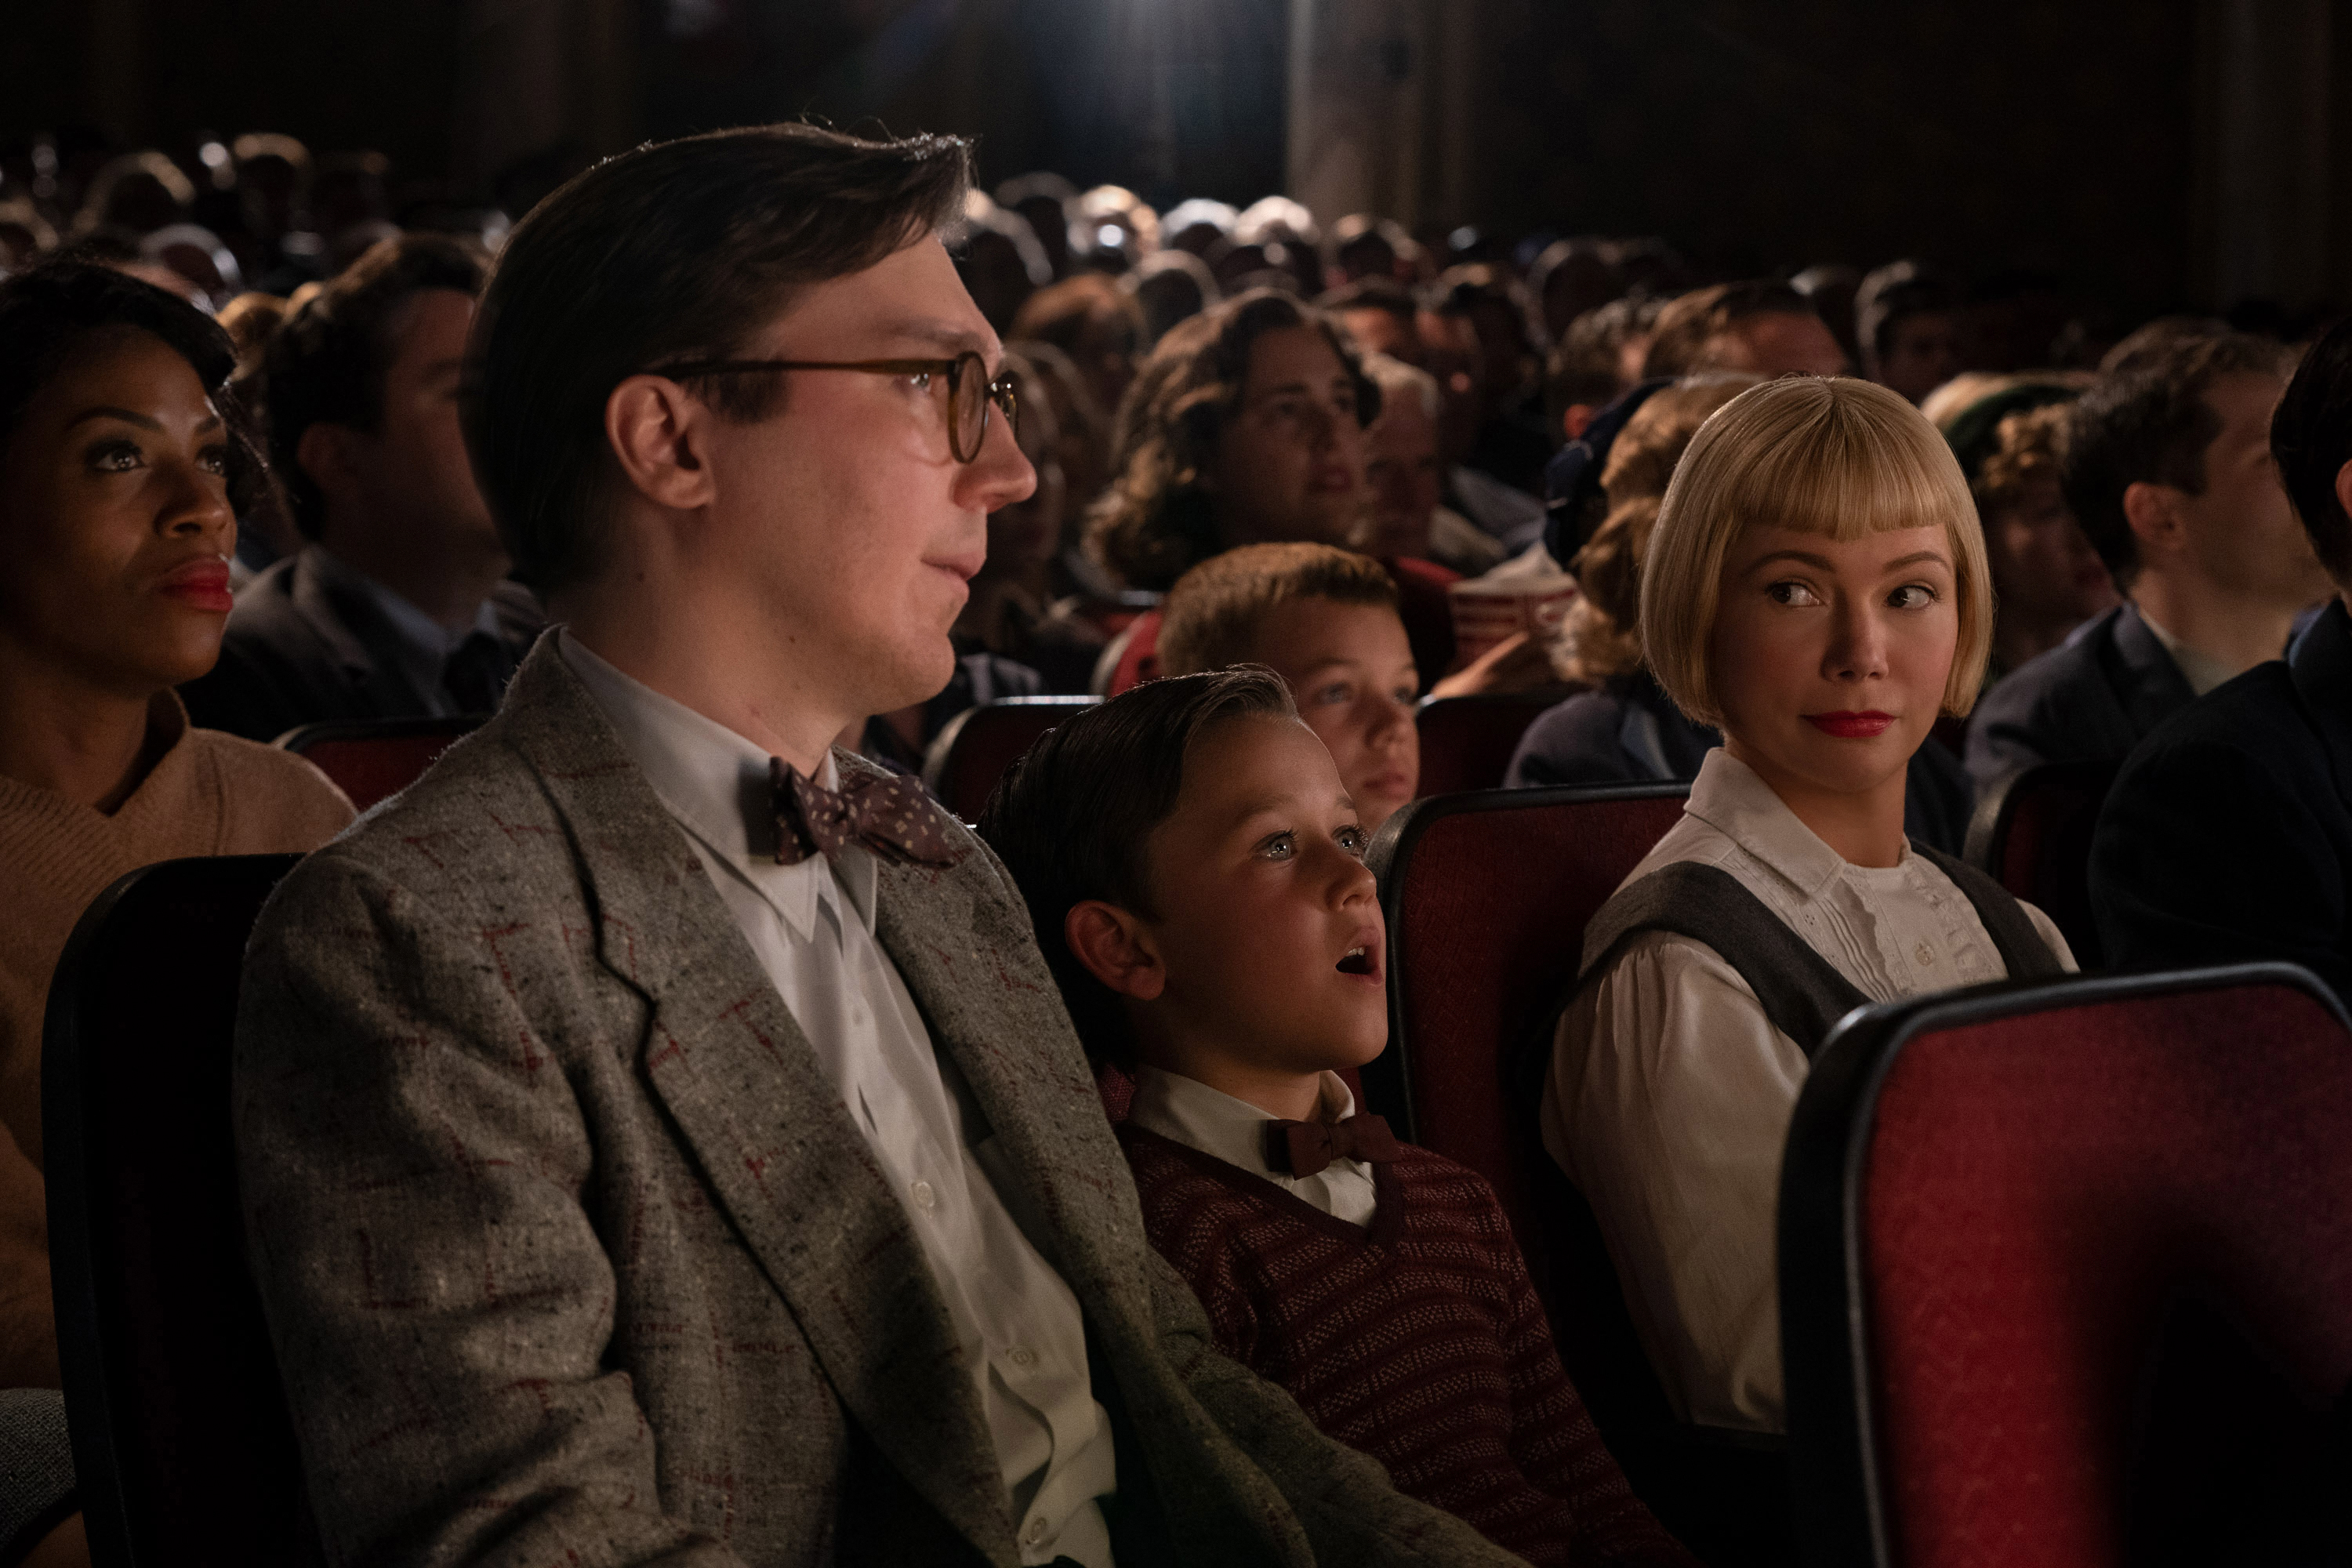 Paul Dano (left) and Michelle Williams (right) in 'The Fabelmans' (Merie Weismiller Wallace/Universal Studios)